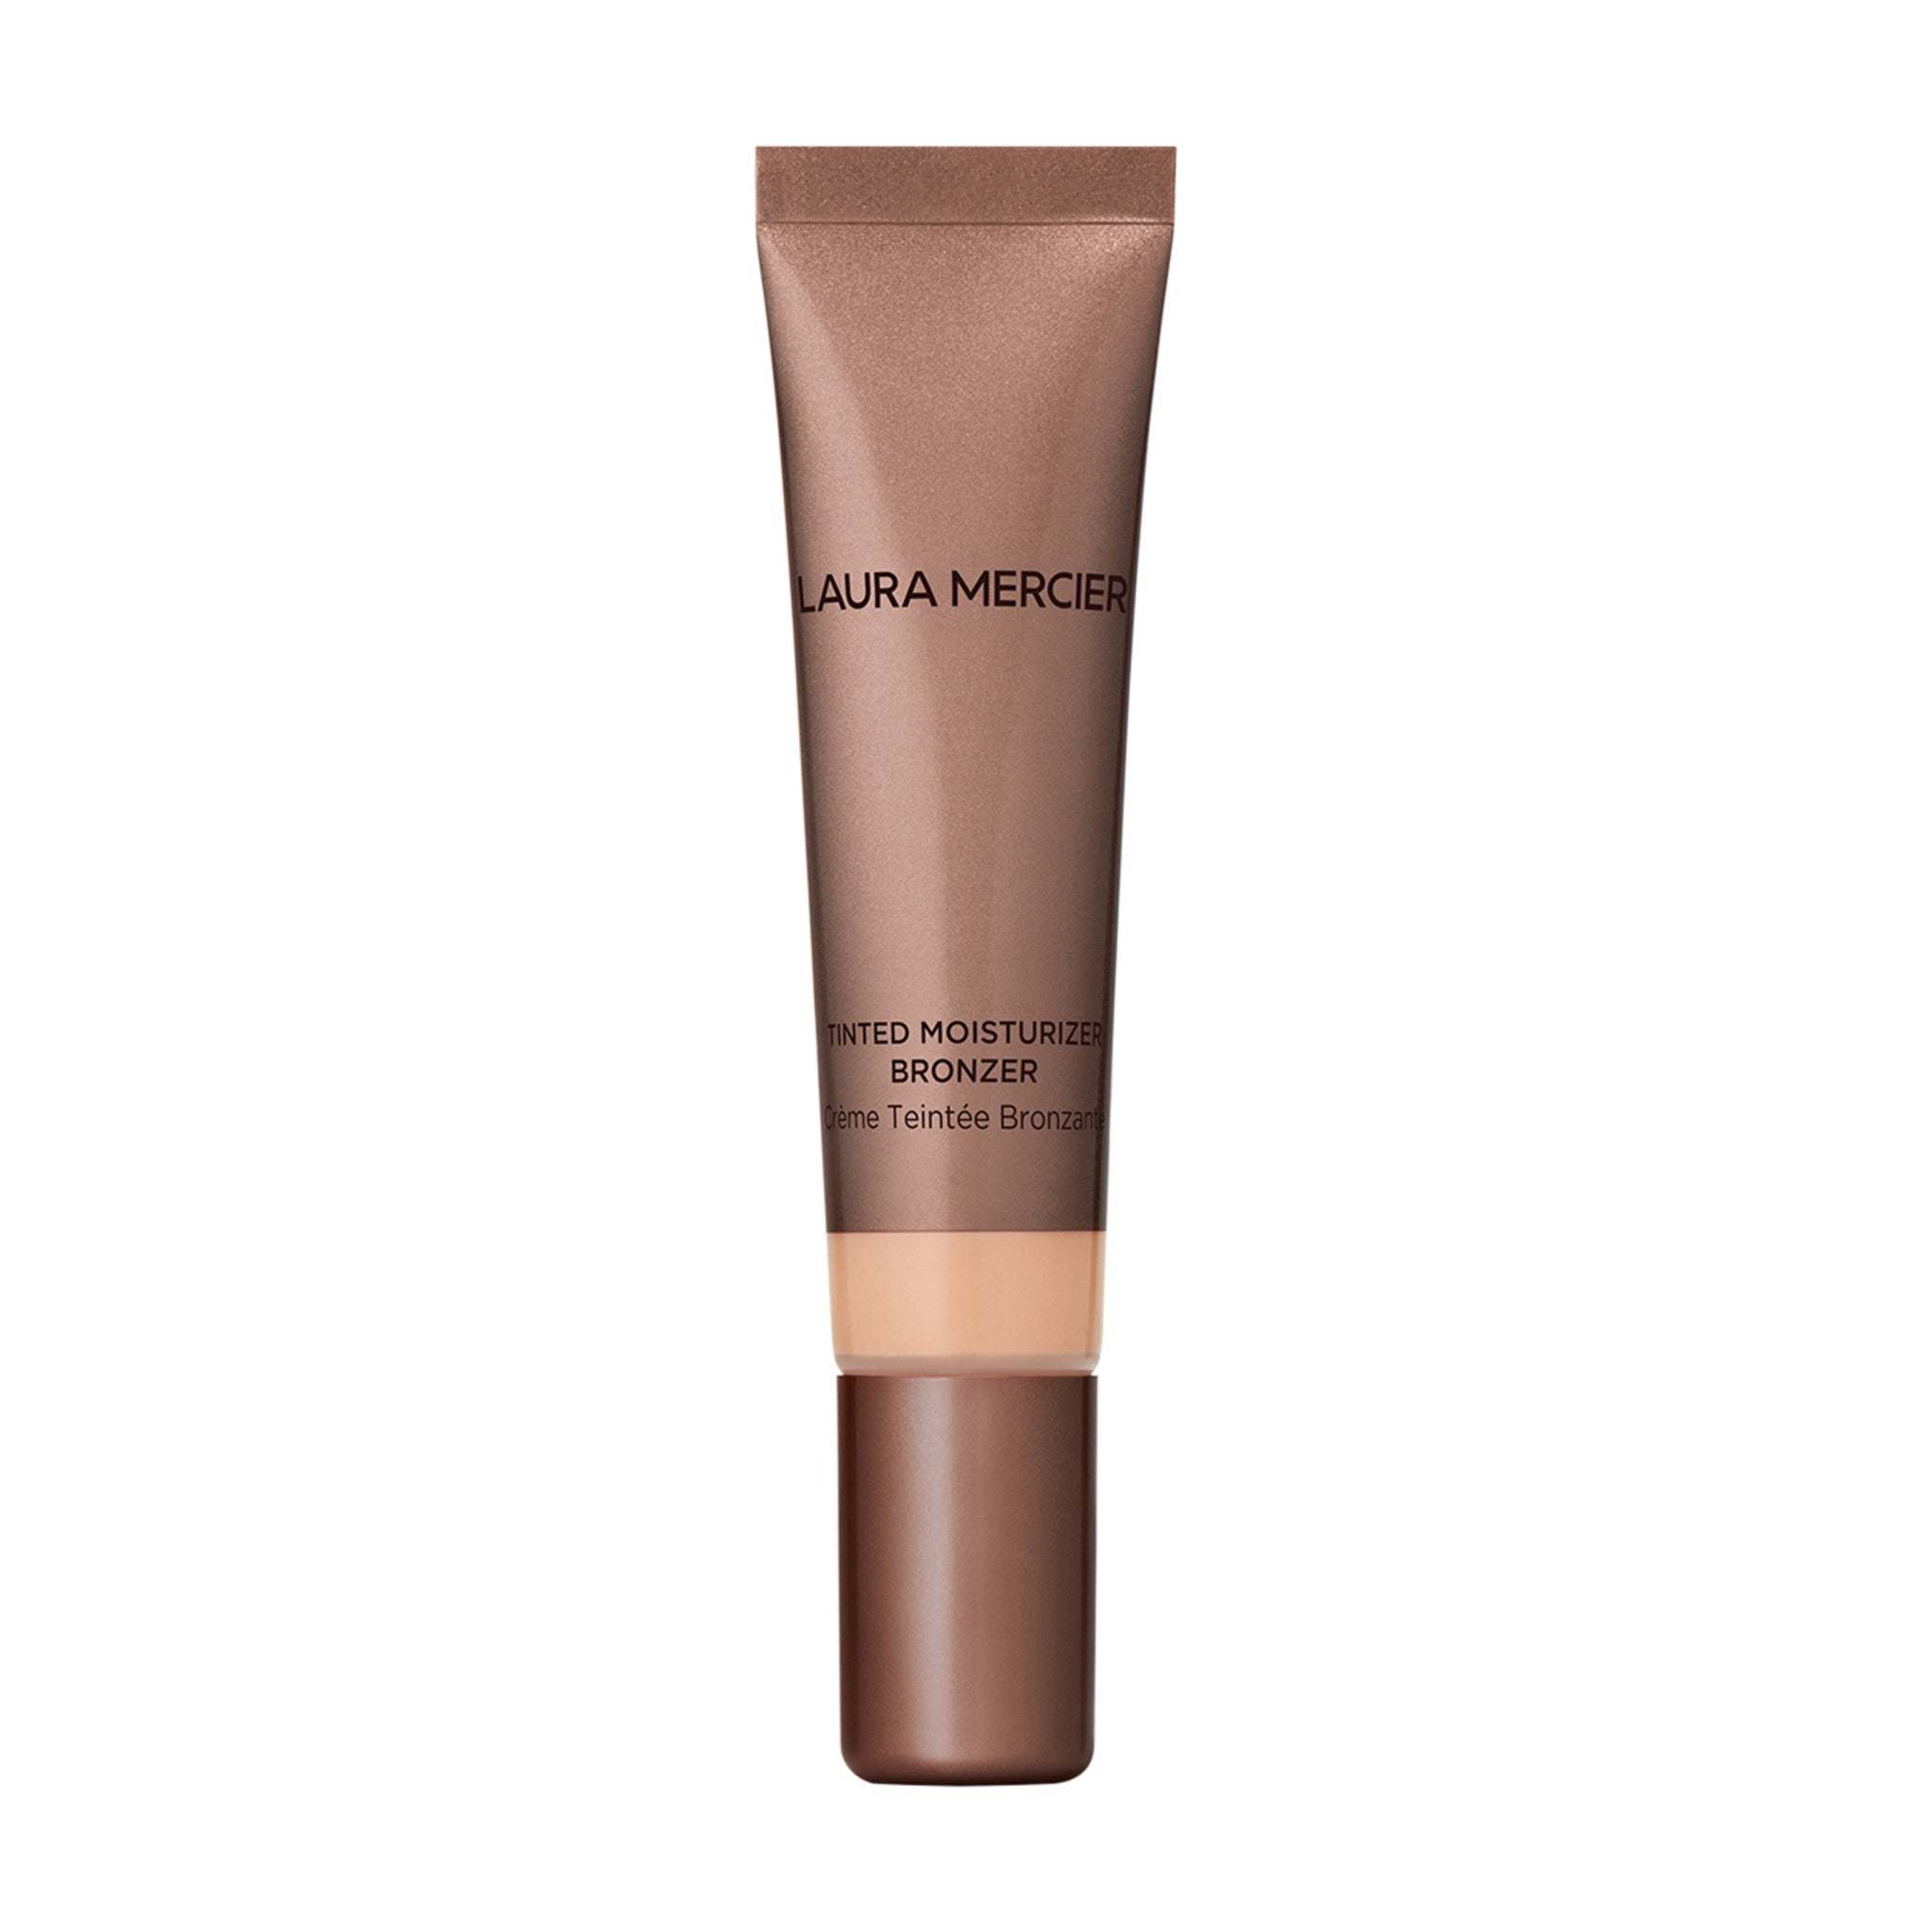 Laura Mercier Tinted Moisturizer Bronzer Color/Shade variant: 01 Sunshine main image. This product is for light complexions